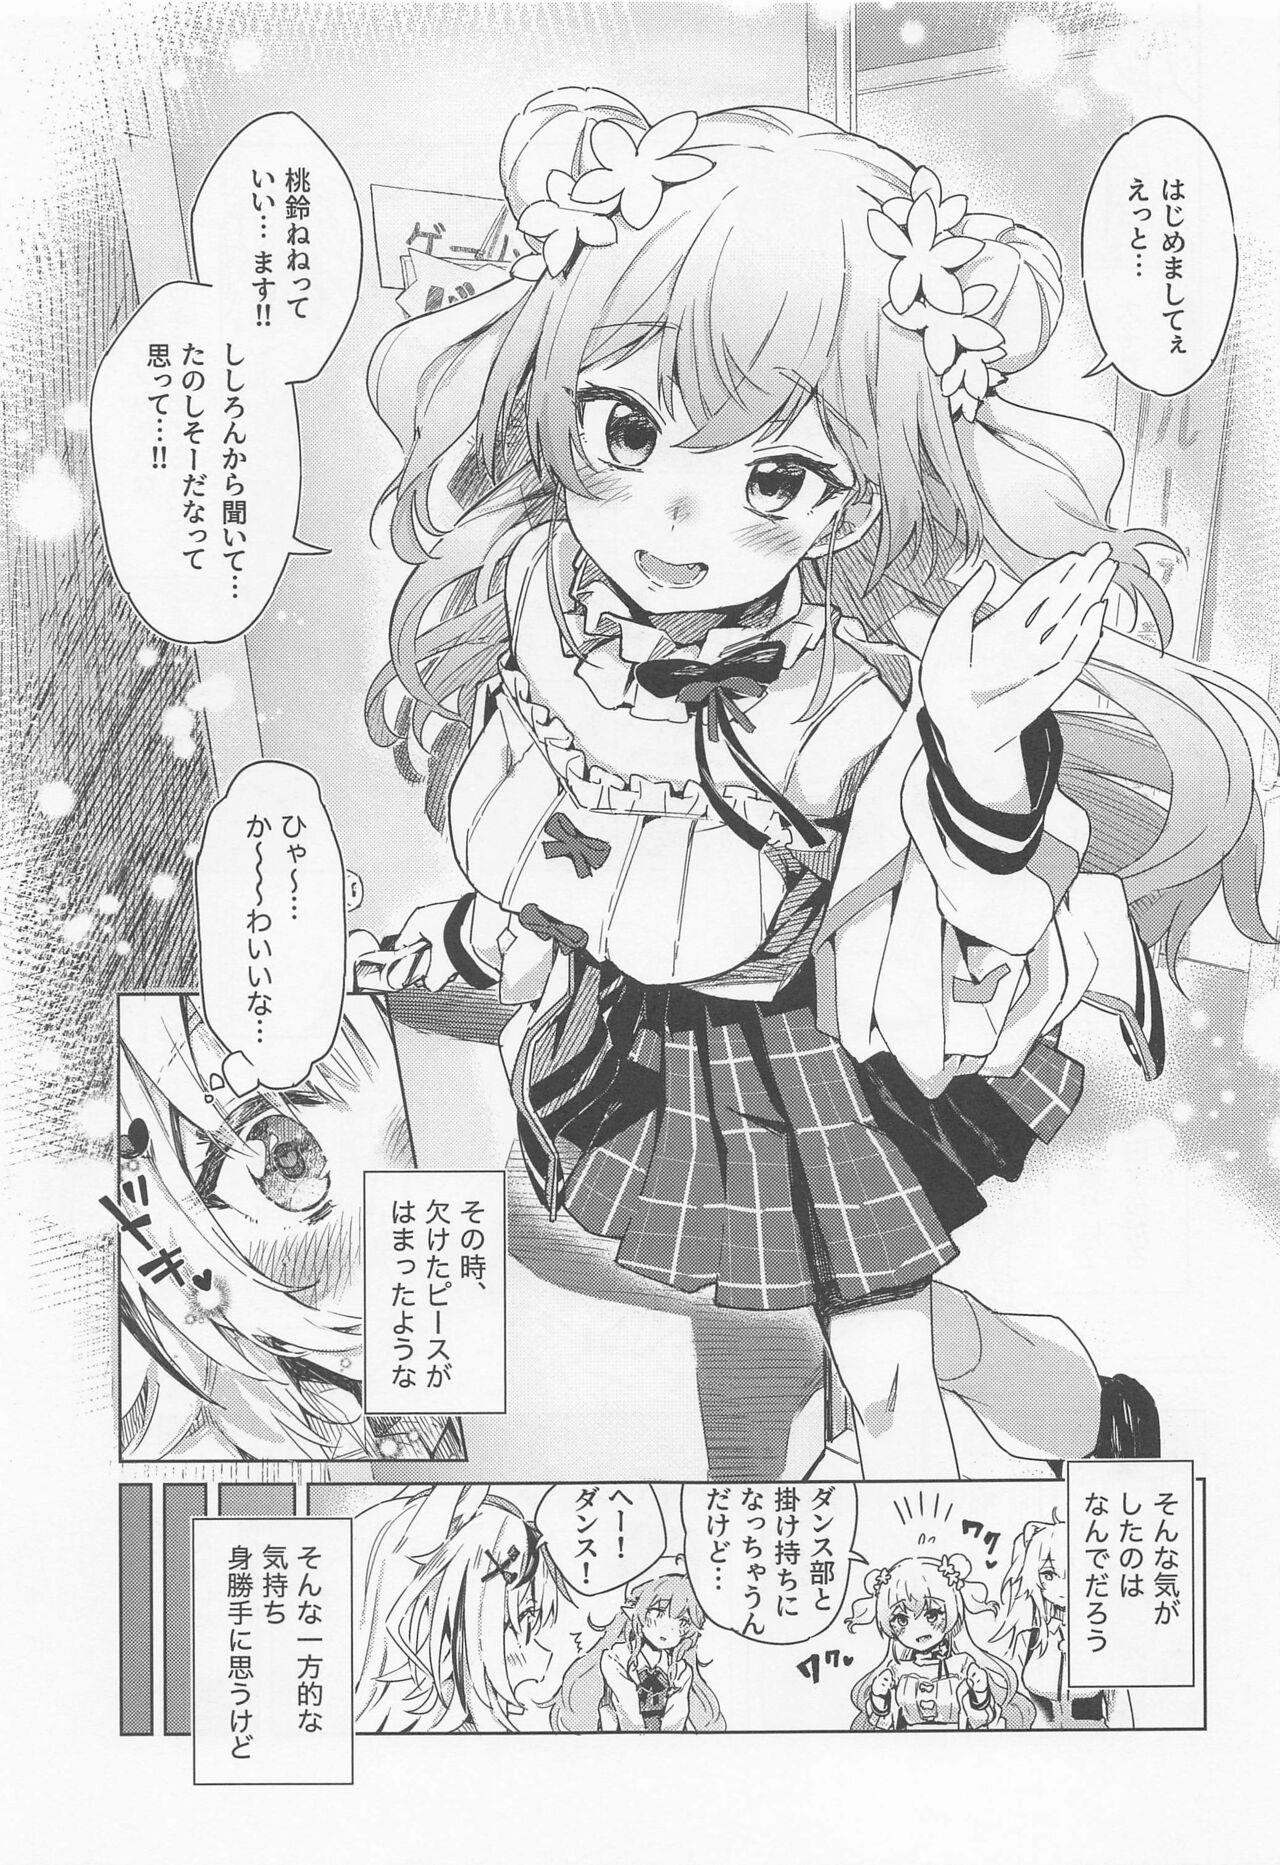 Fennec wa Iseijin no Yume o Miru ka - Does The Fennec Dream of The Lovely Visitor? 3